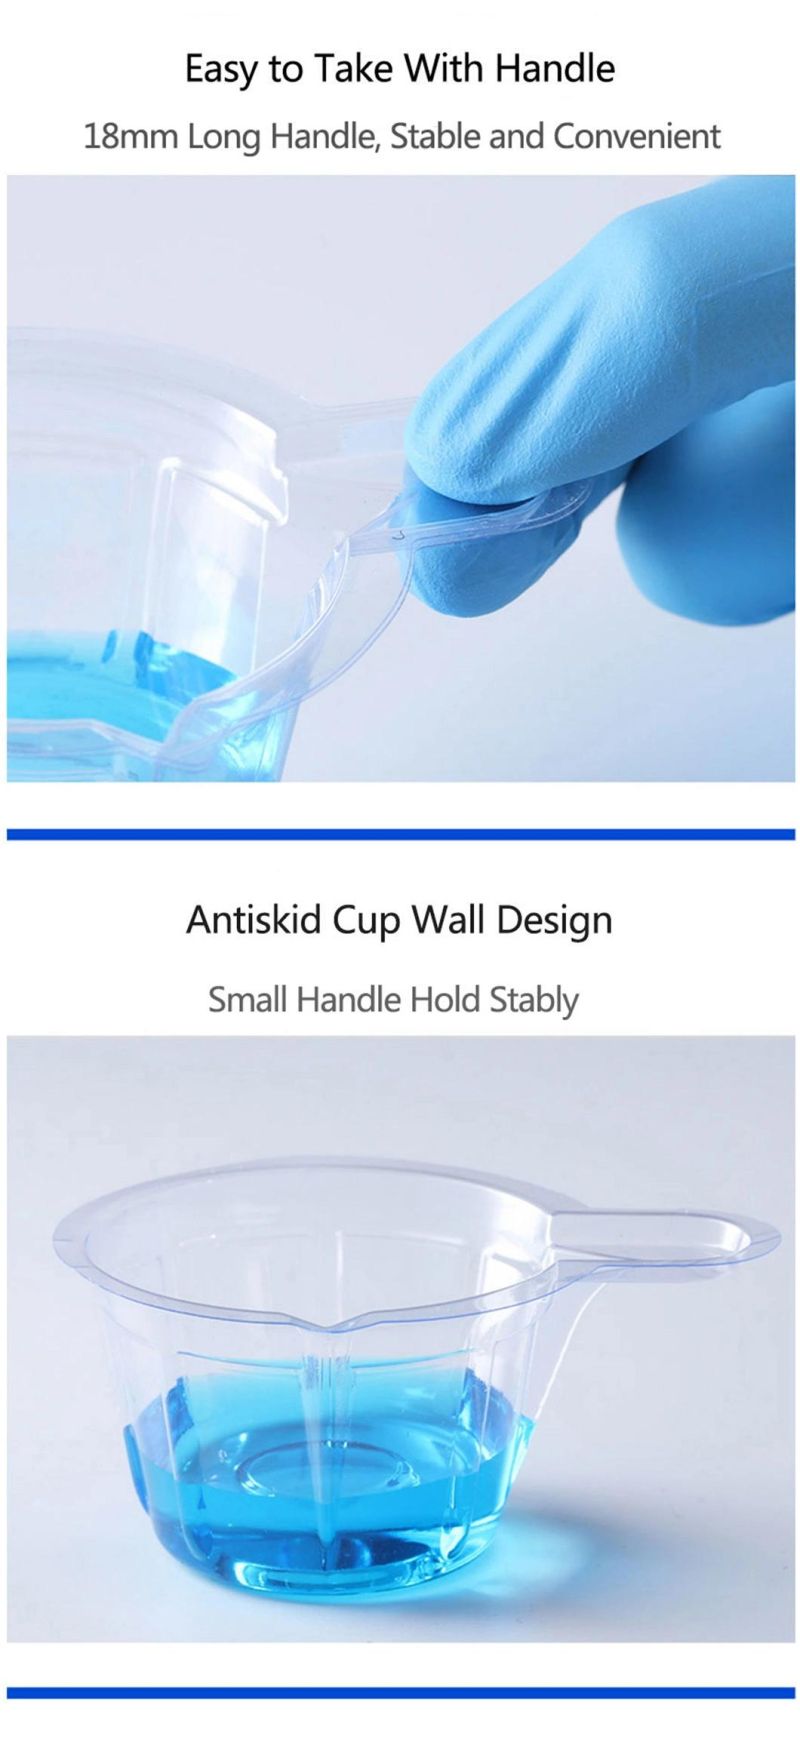 Medical Disposable Urine Specimen Cup with Different Sizes